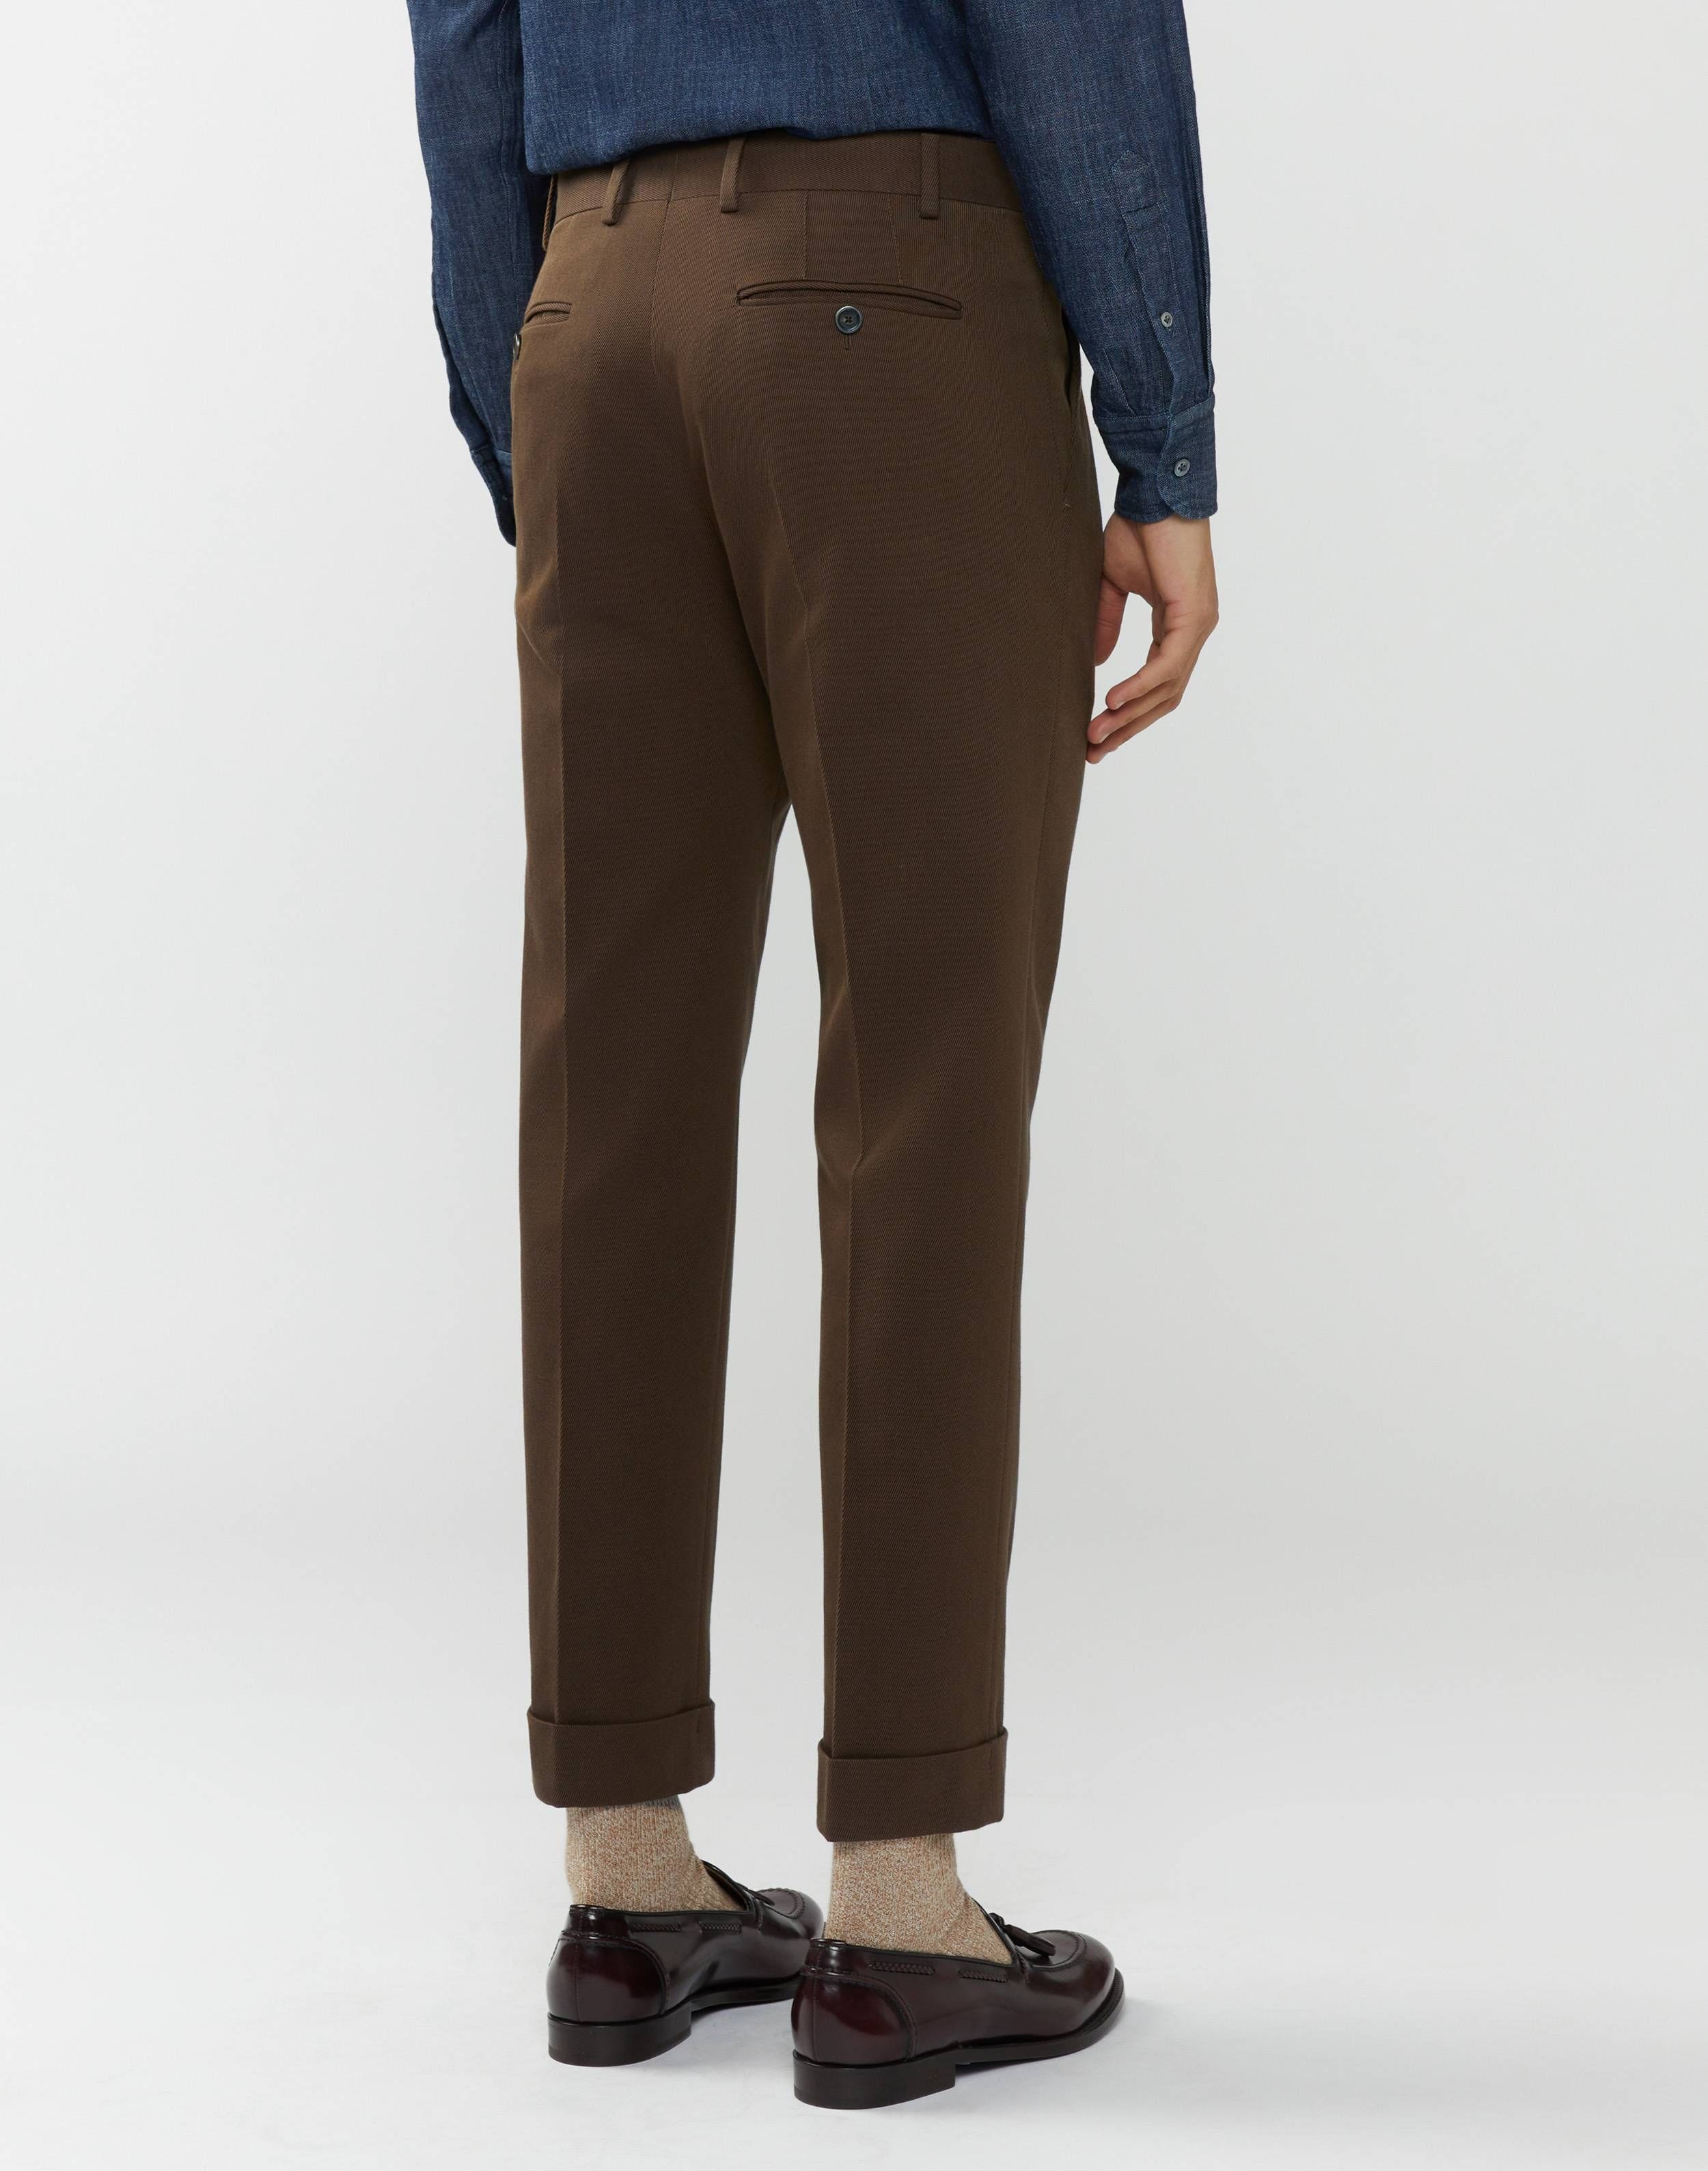 Brown-and-beige trousers in stretchy wool and cotton 